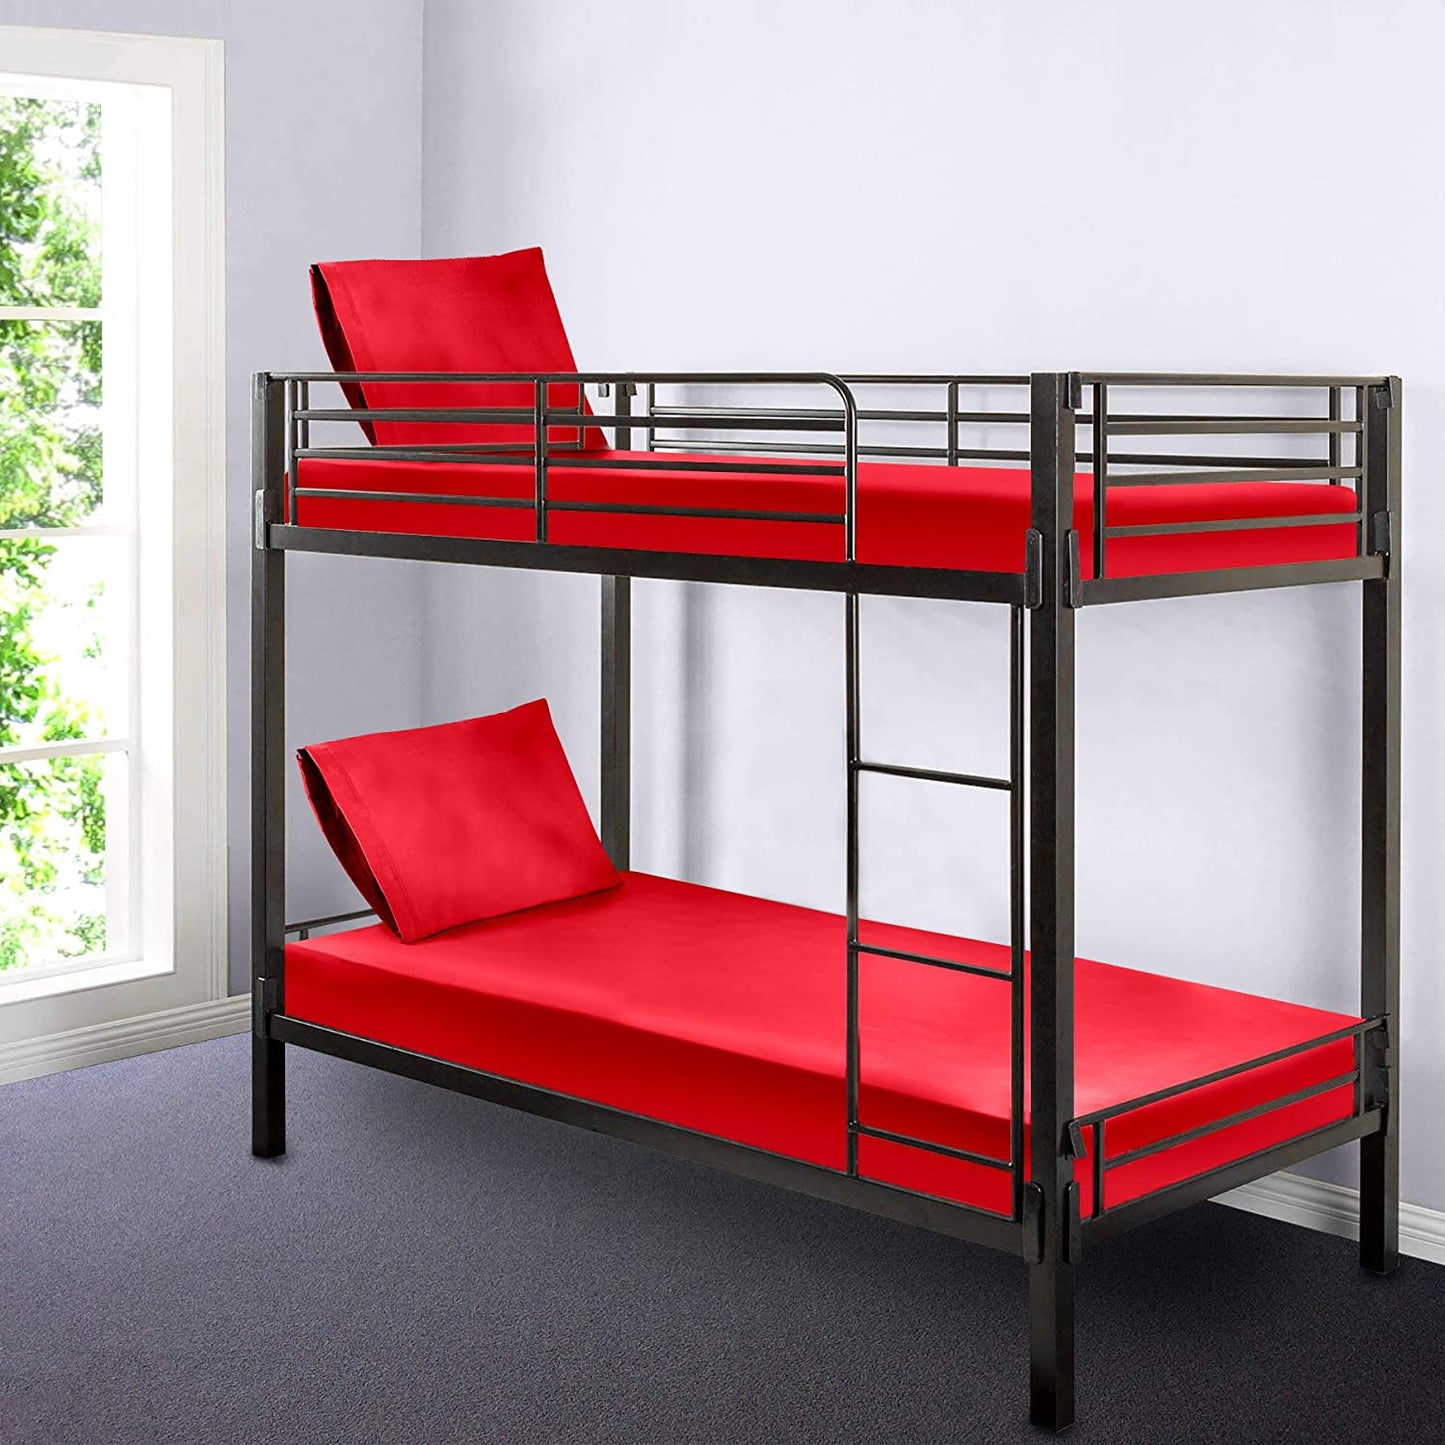 Gilbins 30" x 75" Cot Size 2-Piece Bed Sheet Set, Made of Ultra Soft Cotton, Perfect for Camp Bunk Beds/RVs/Guest Beds (Red)